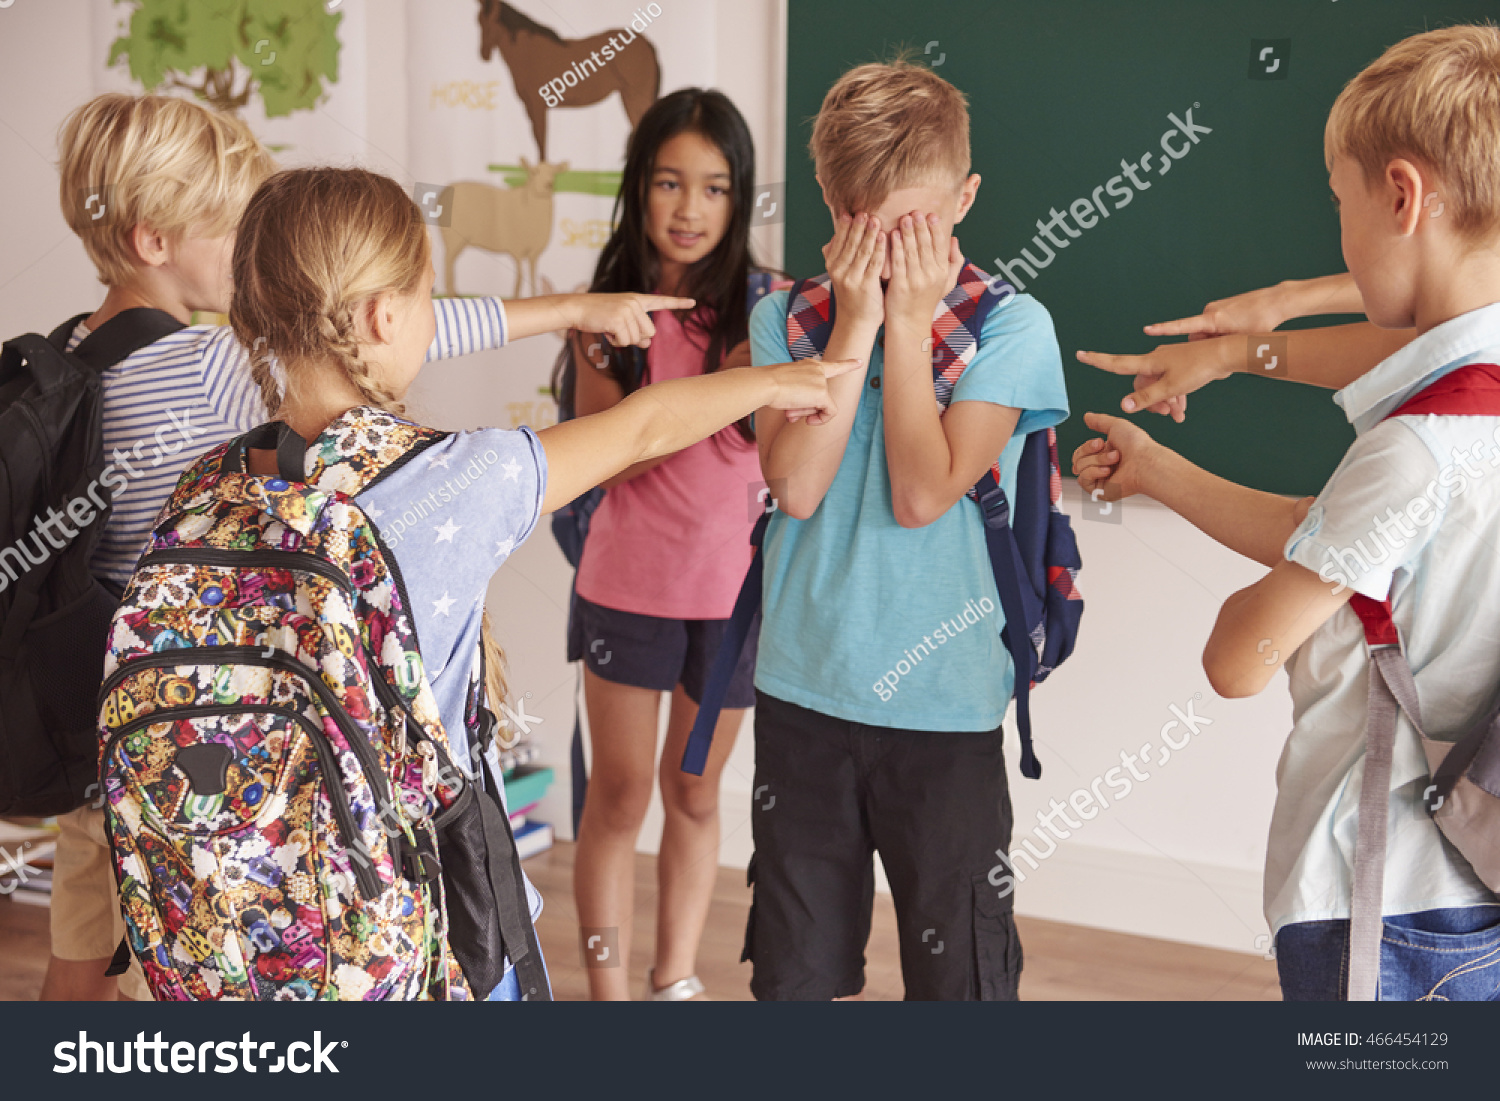 stock-photo-kids-laughing-at-their-classmate-466454129.jpg